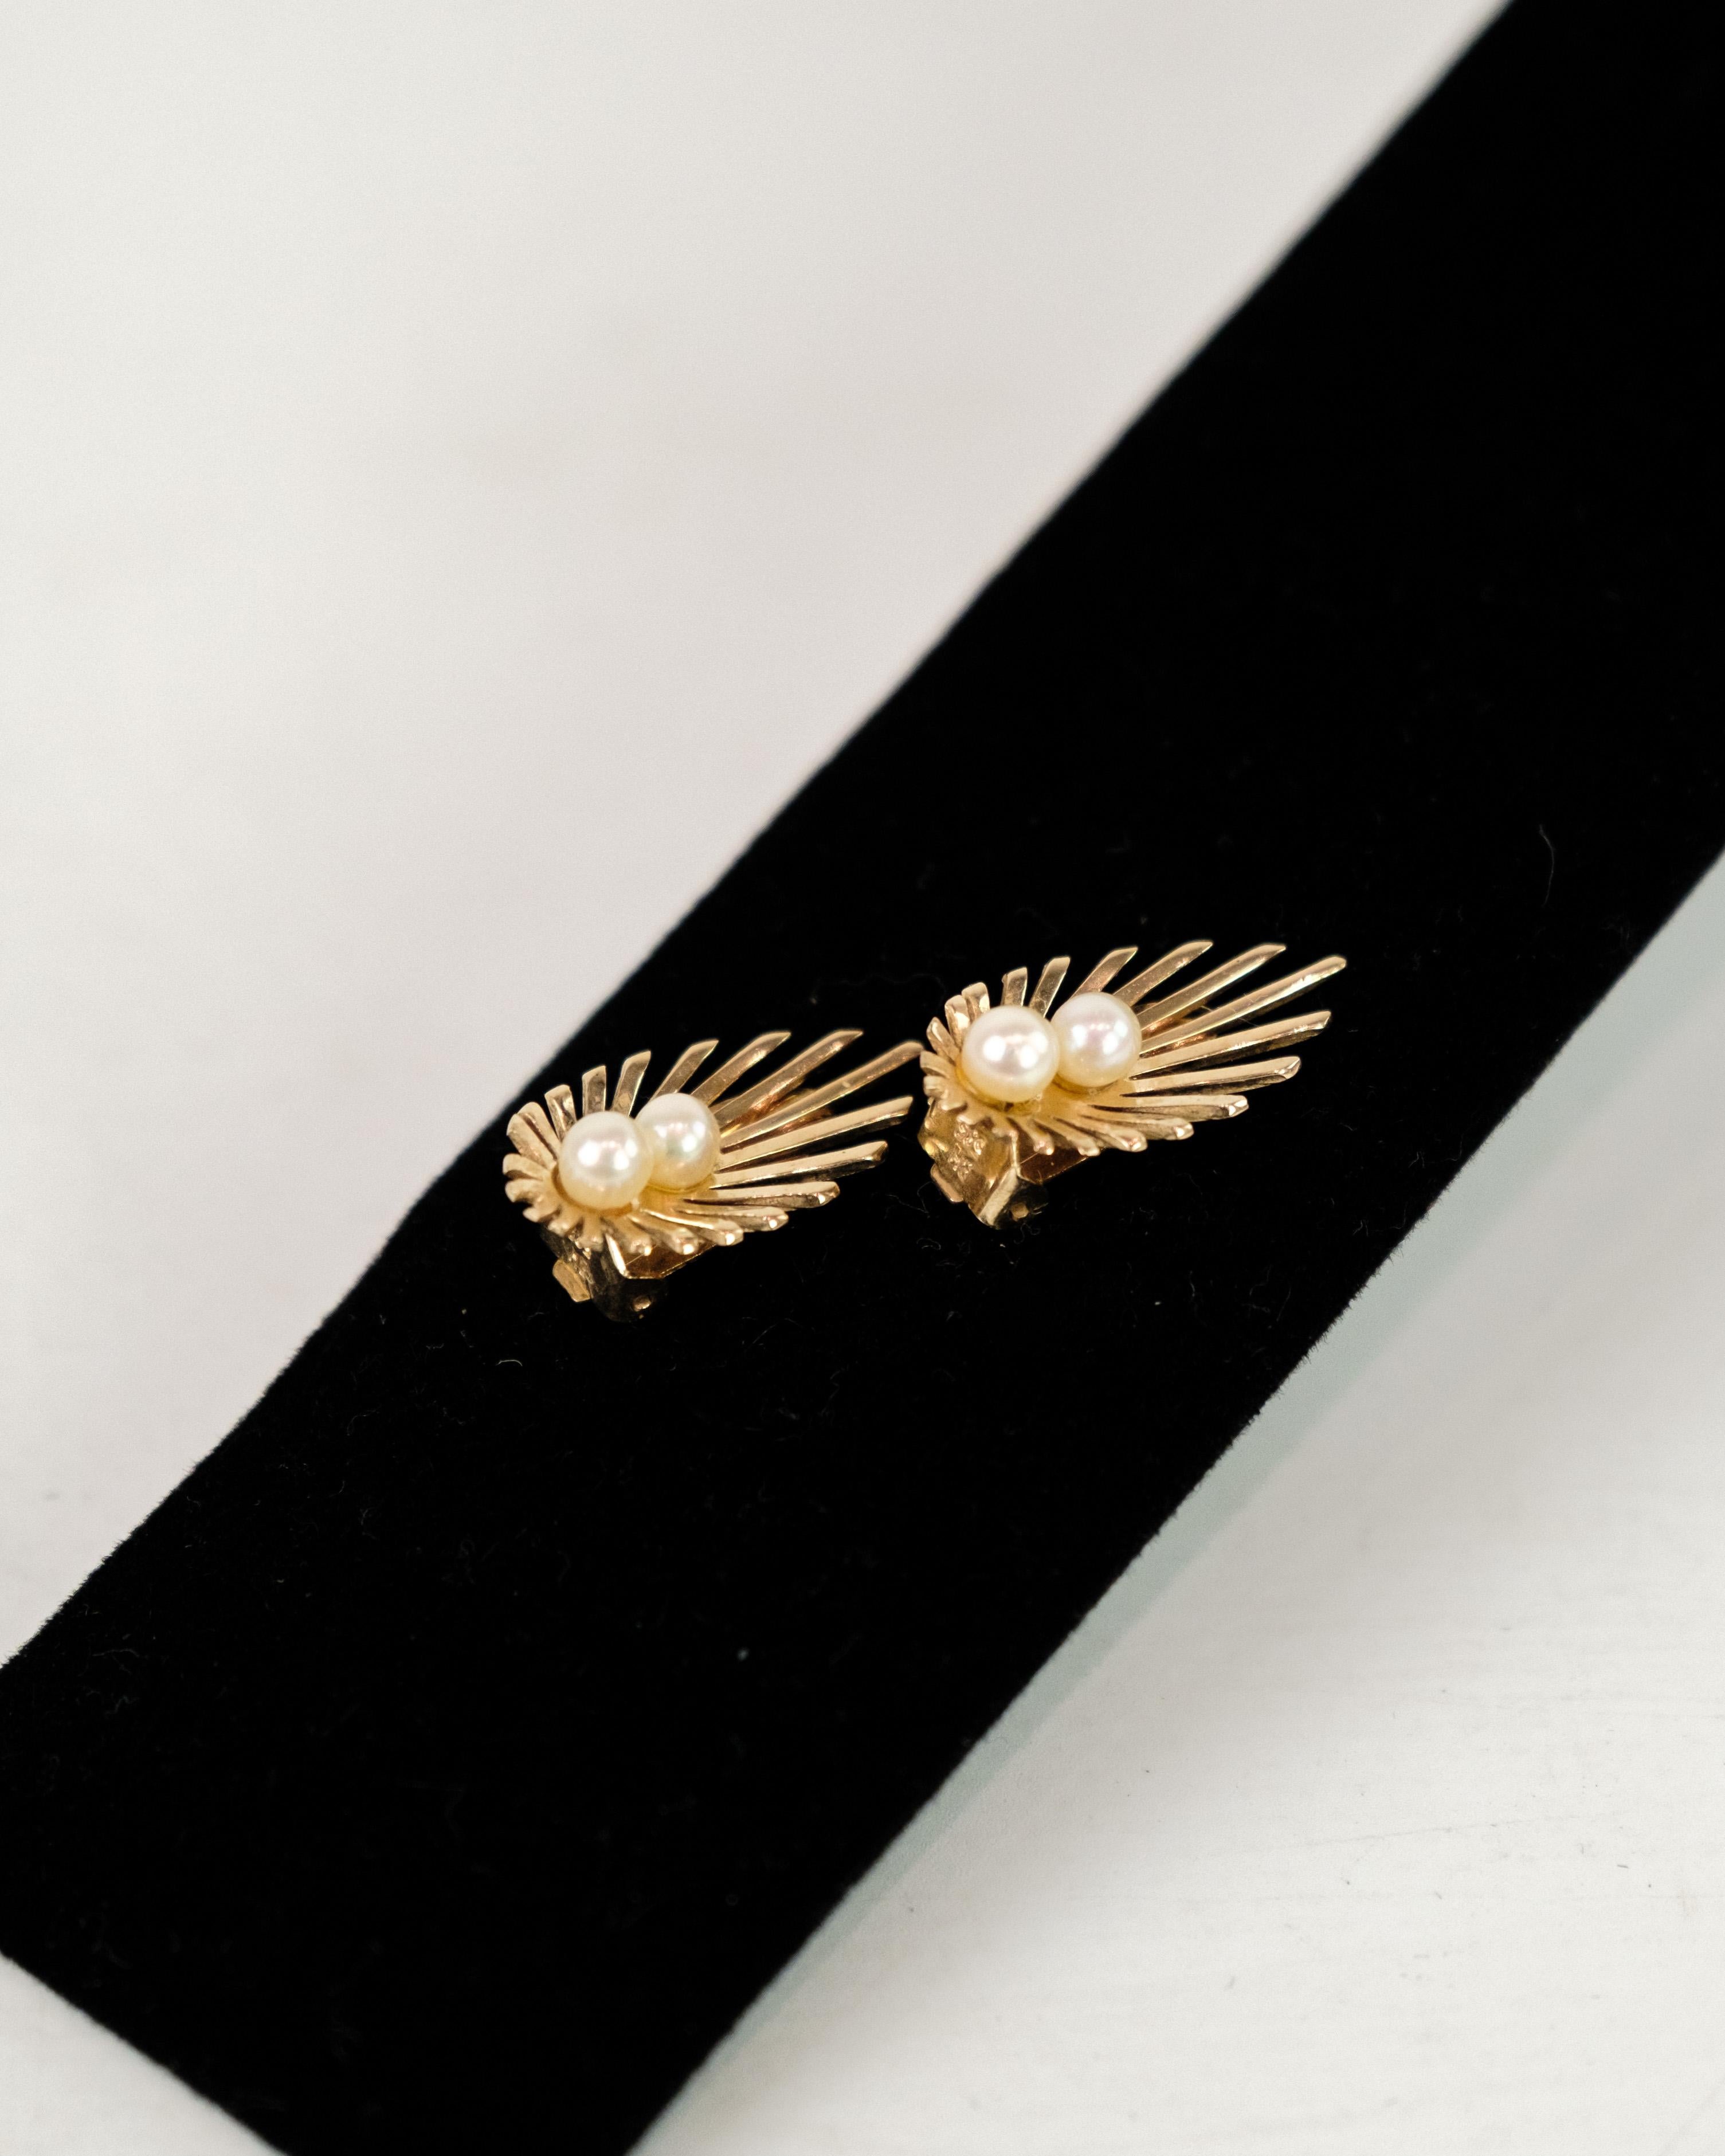 Vintage 14 carat ear clips stamped 585, bra designed by Bernhard Hertz - Copenhagen. The ear clips are adorned with two cultured pearls in the color delicate pink. Ear clips of very high quality.
Dimensions in cm: L: 2
Great condition

This